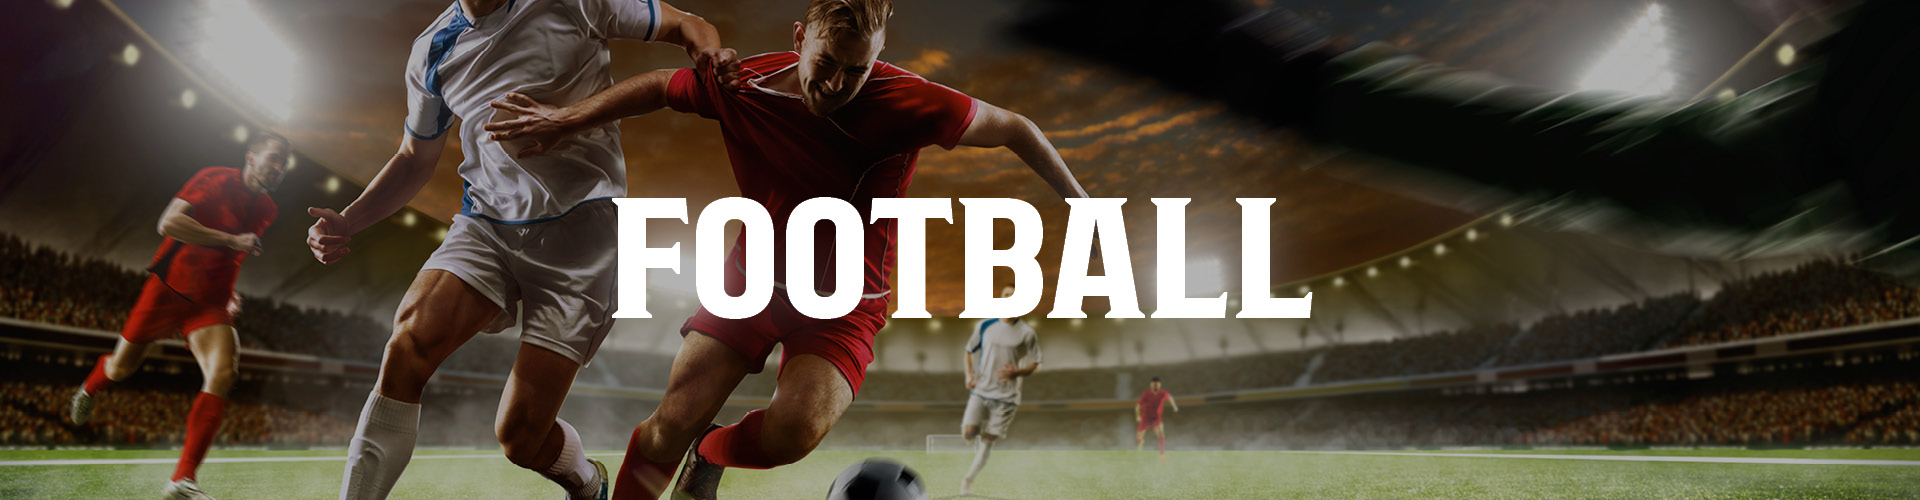 Watch Live Football in Chessington at The William Bourne Pub